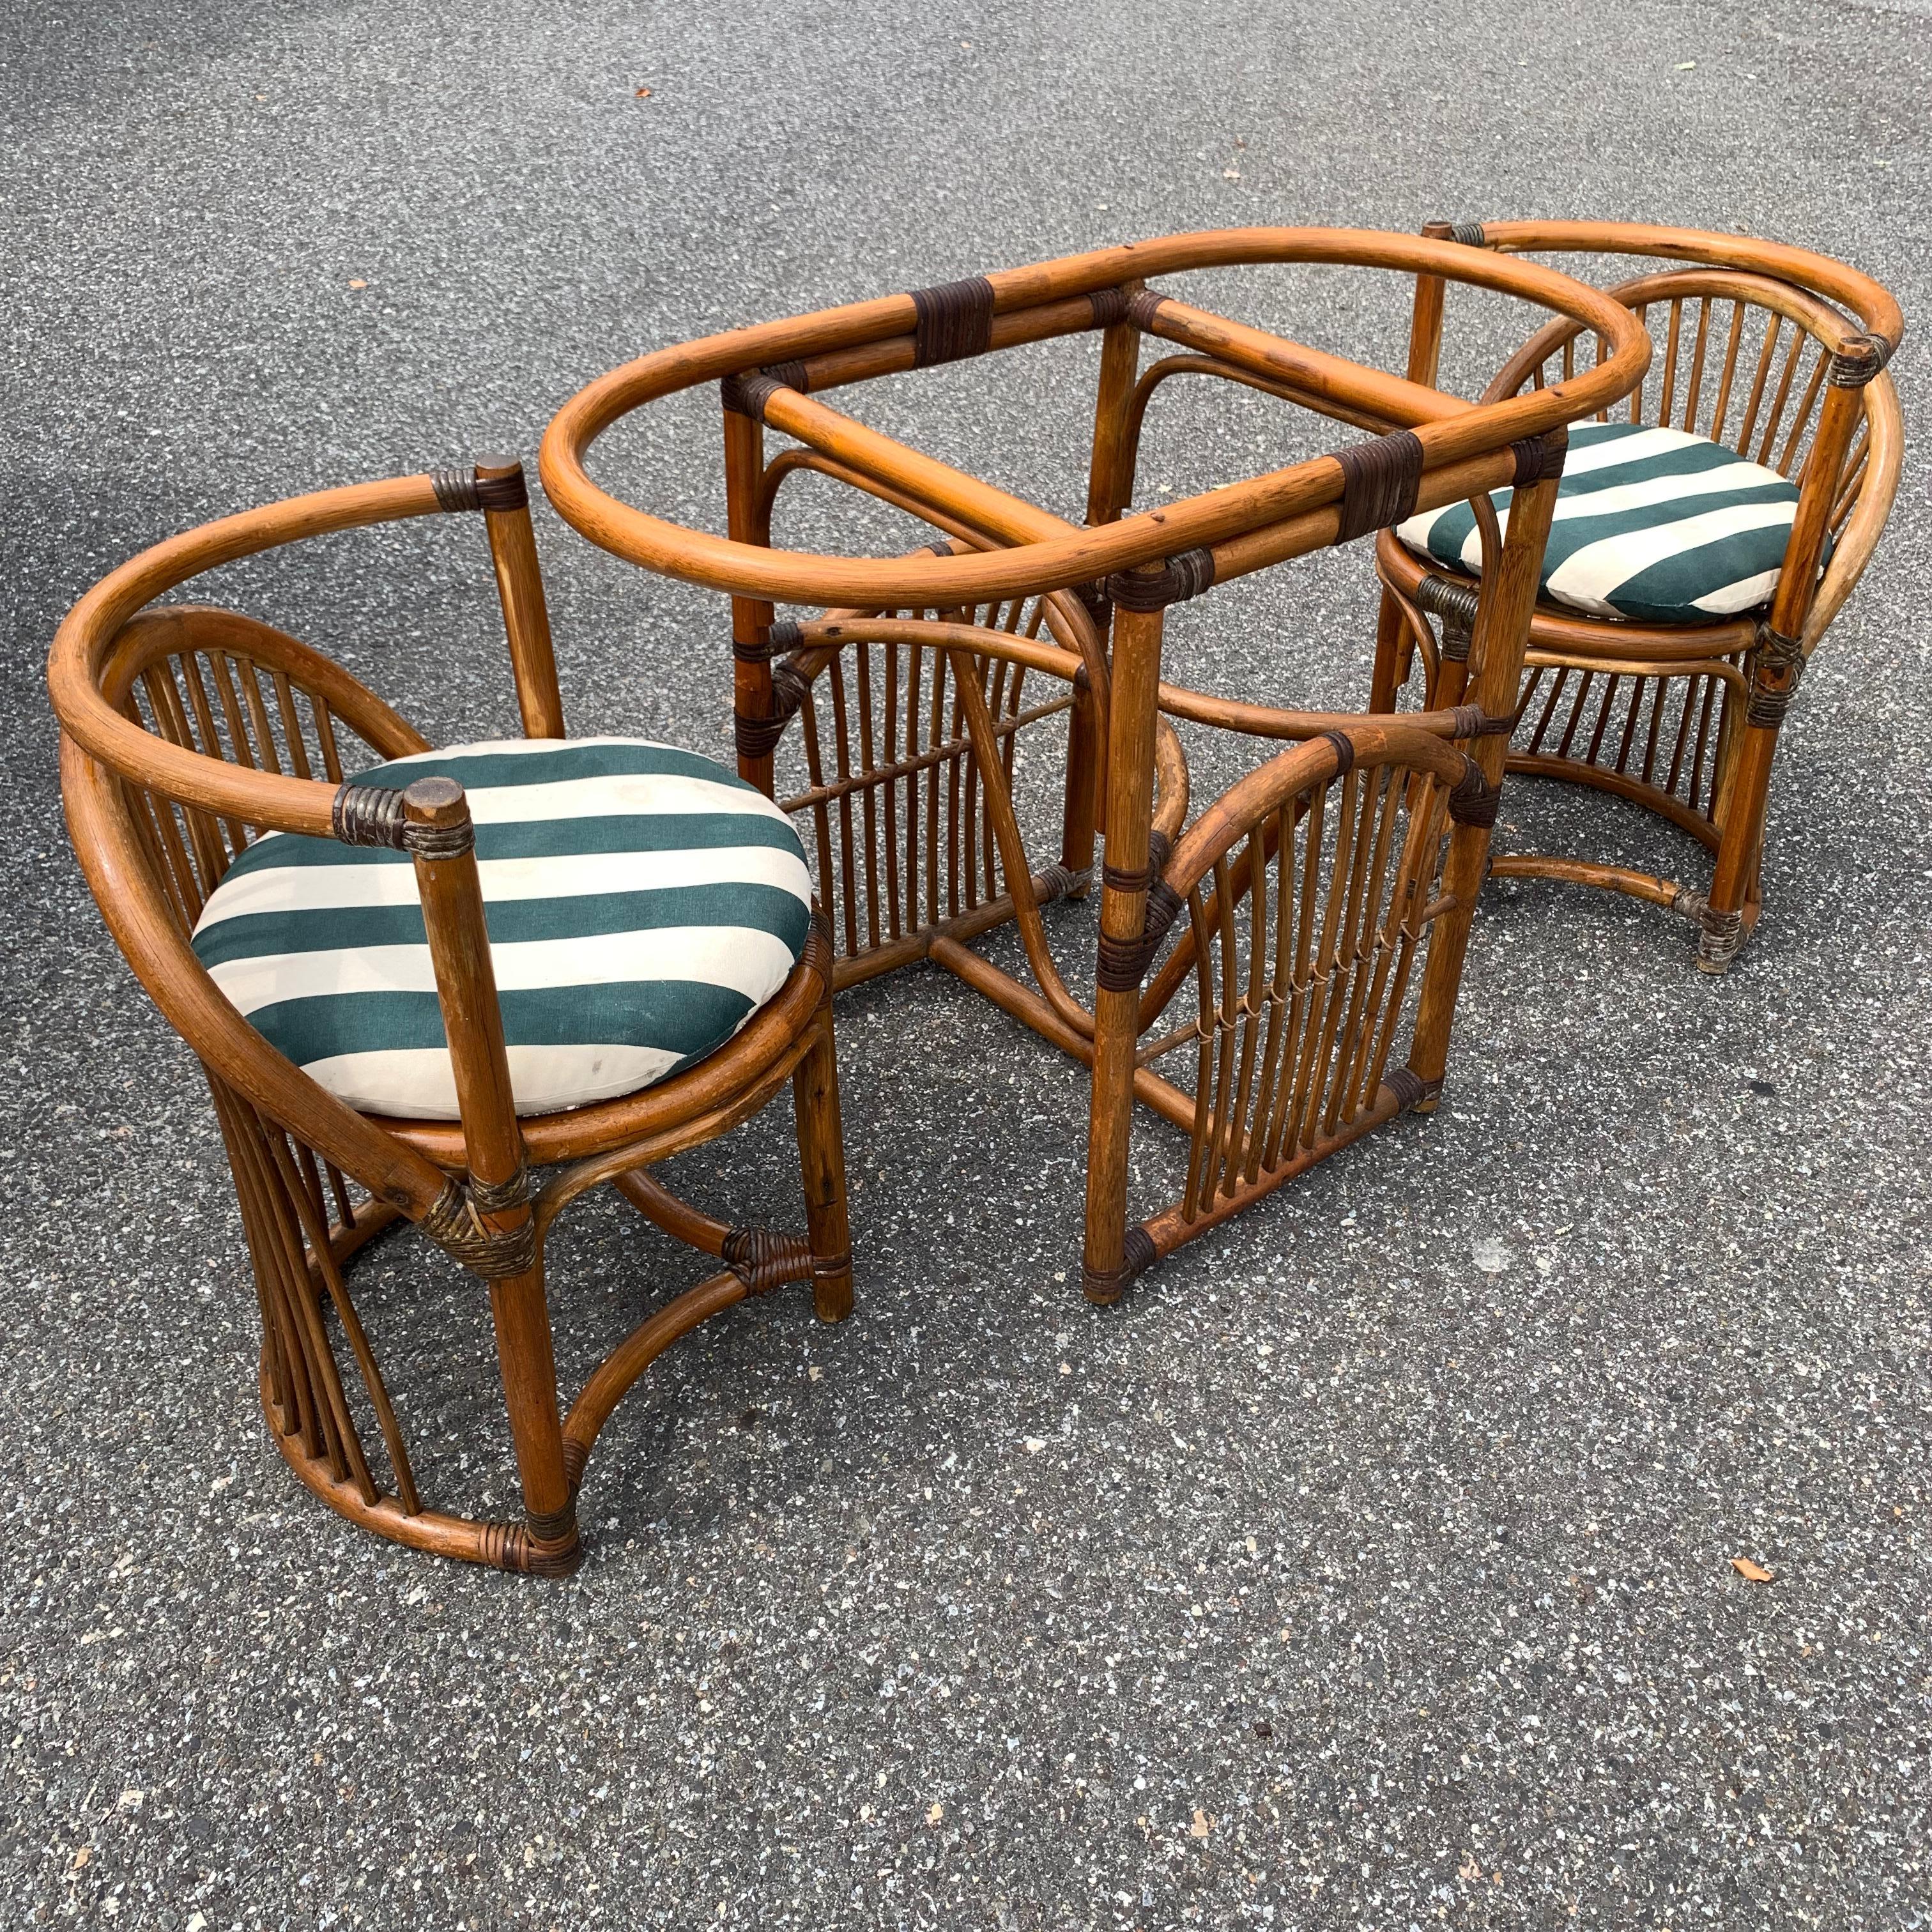 Tiger Wood Bamboo Rattan Dinning Table And Chairs Set  9